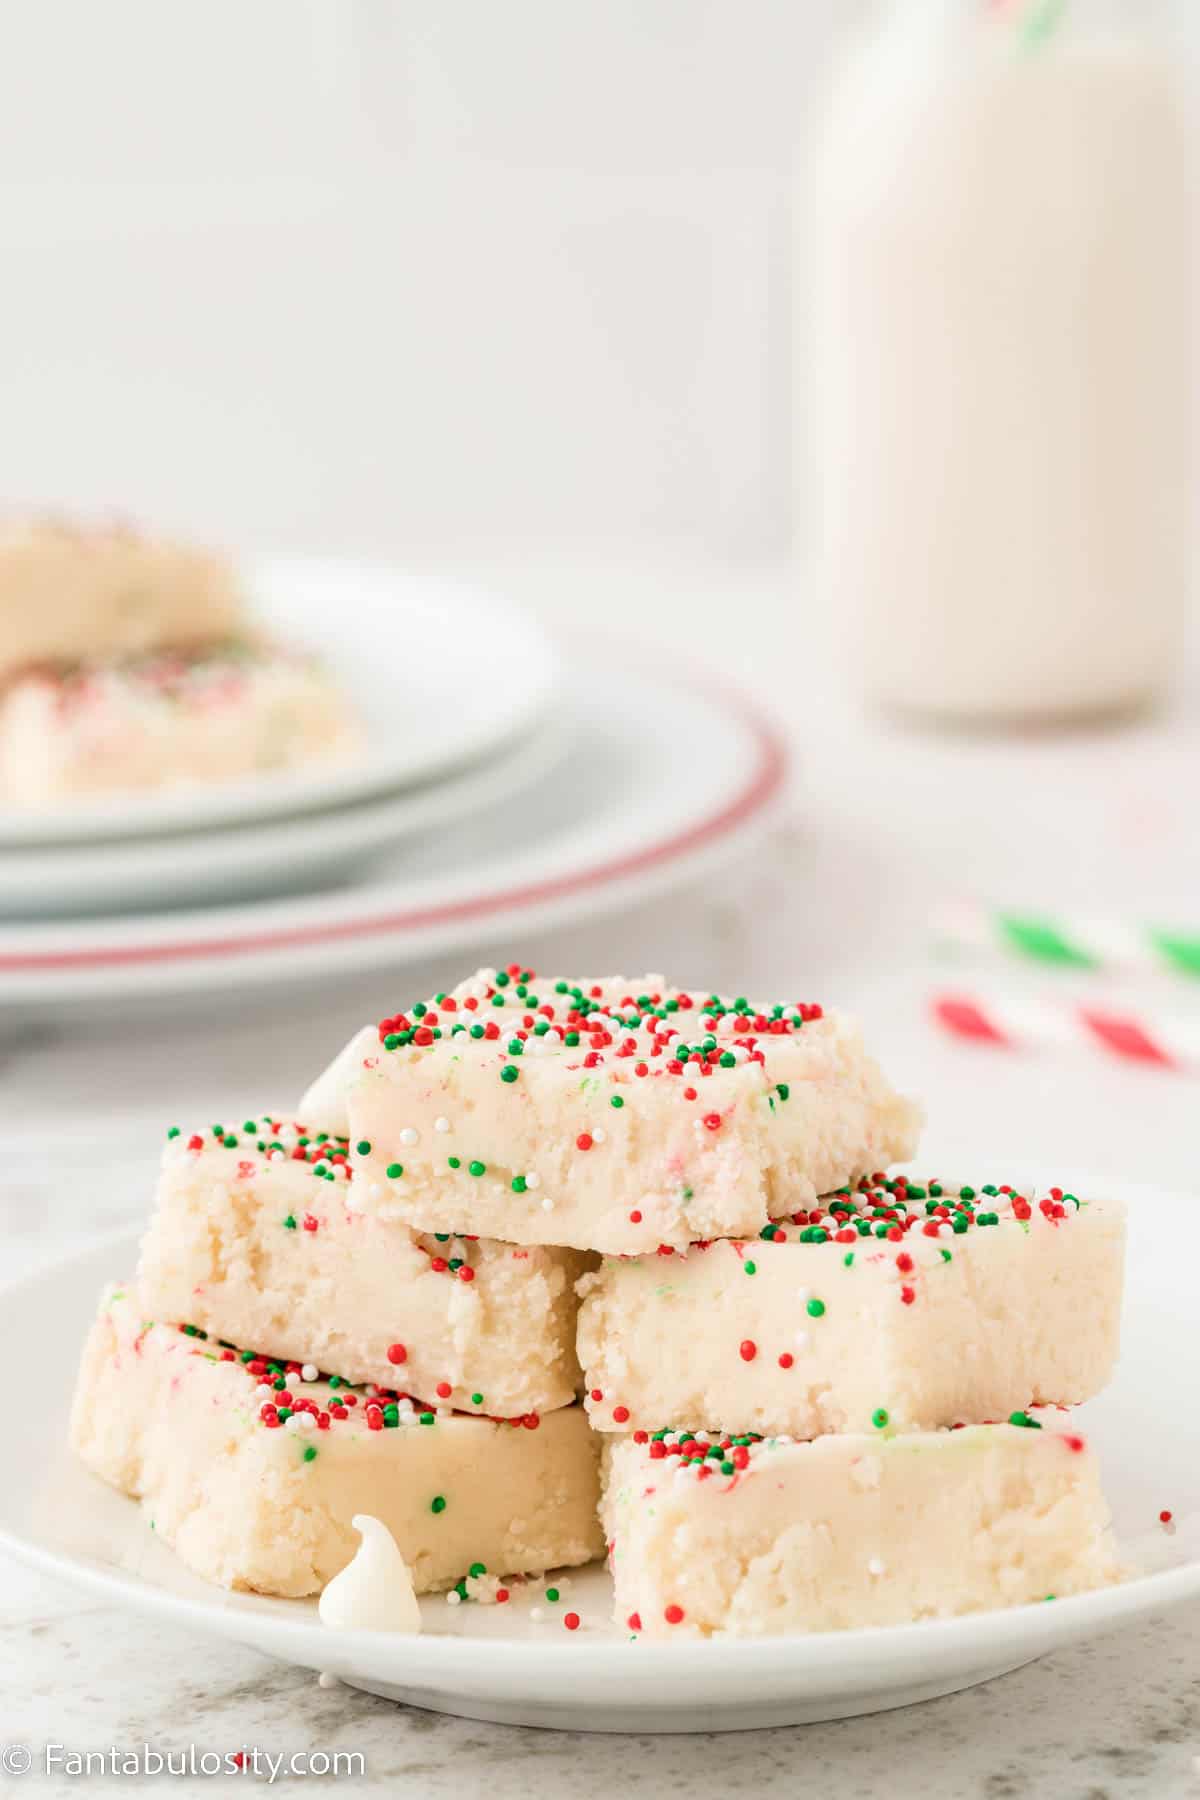 A white plate holding pieces of white fudge topped with red, white and green sprinkles is in the center of the photo and another plate of fudge and a milk bottle are in the background